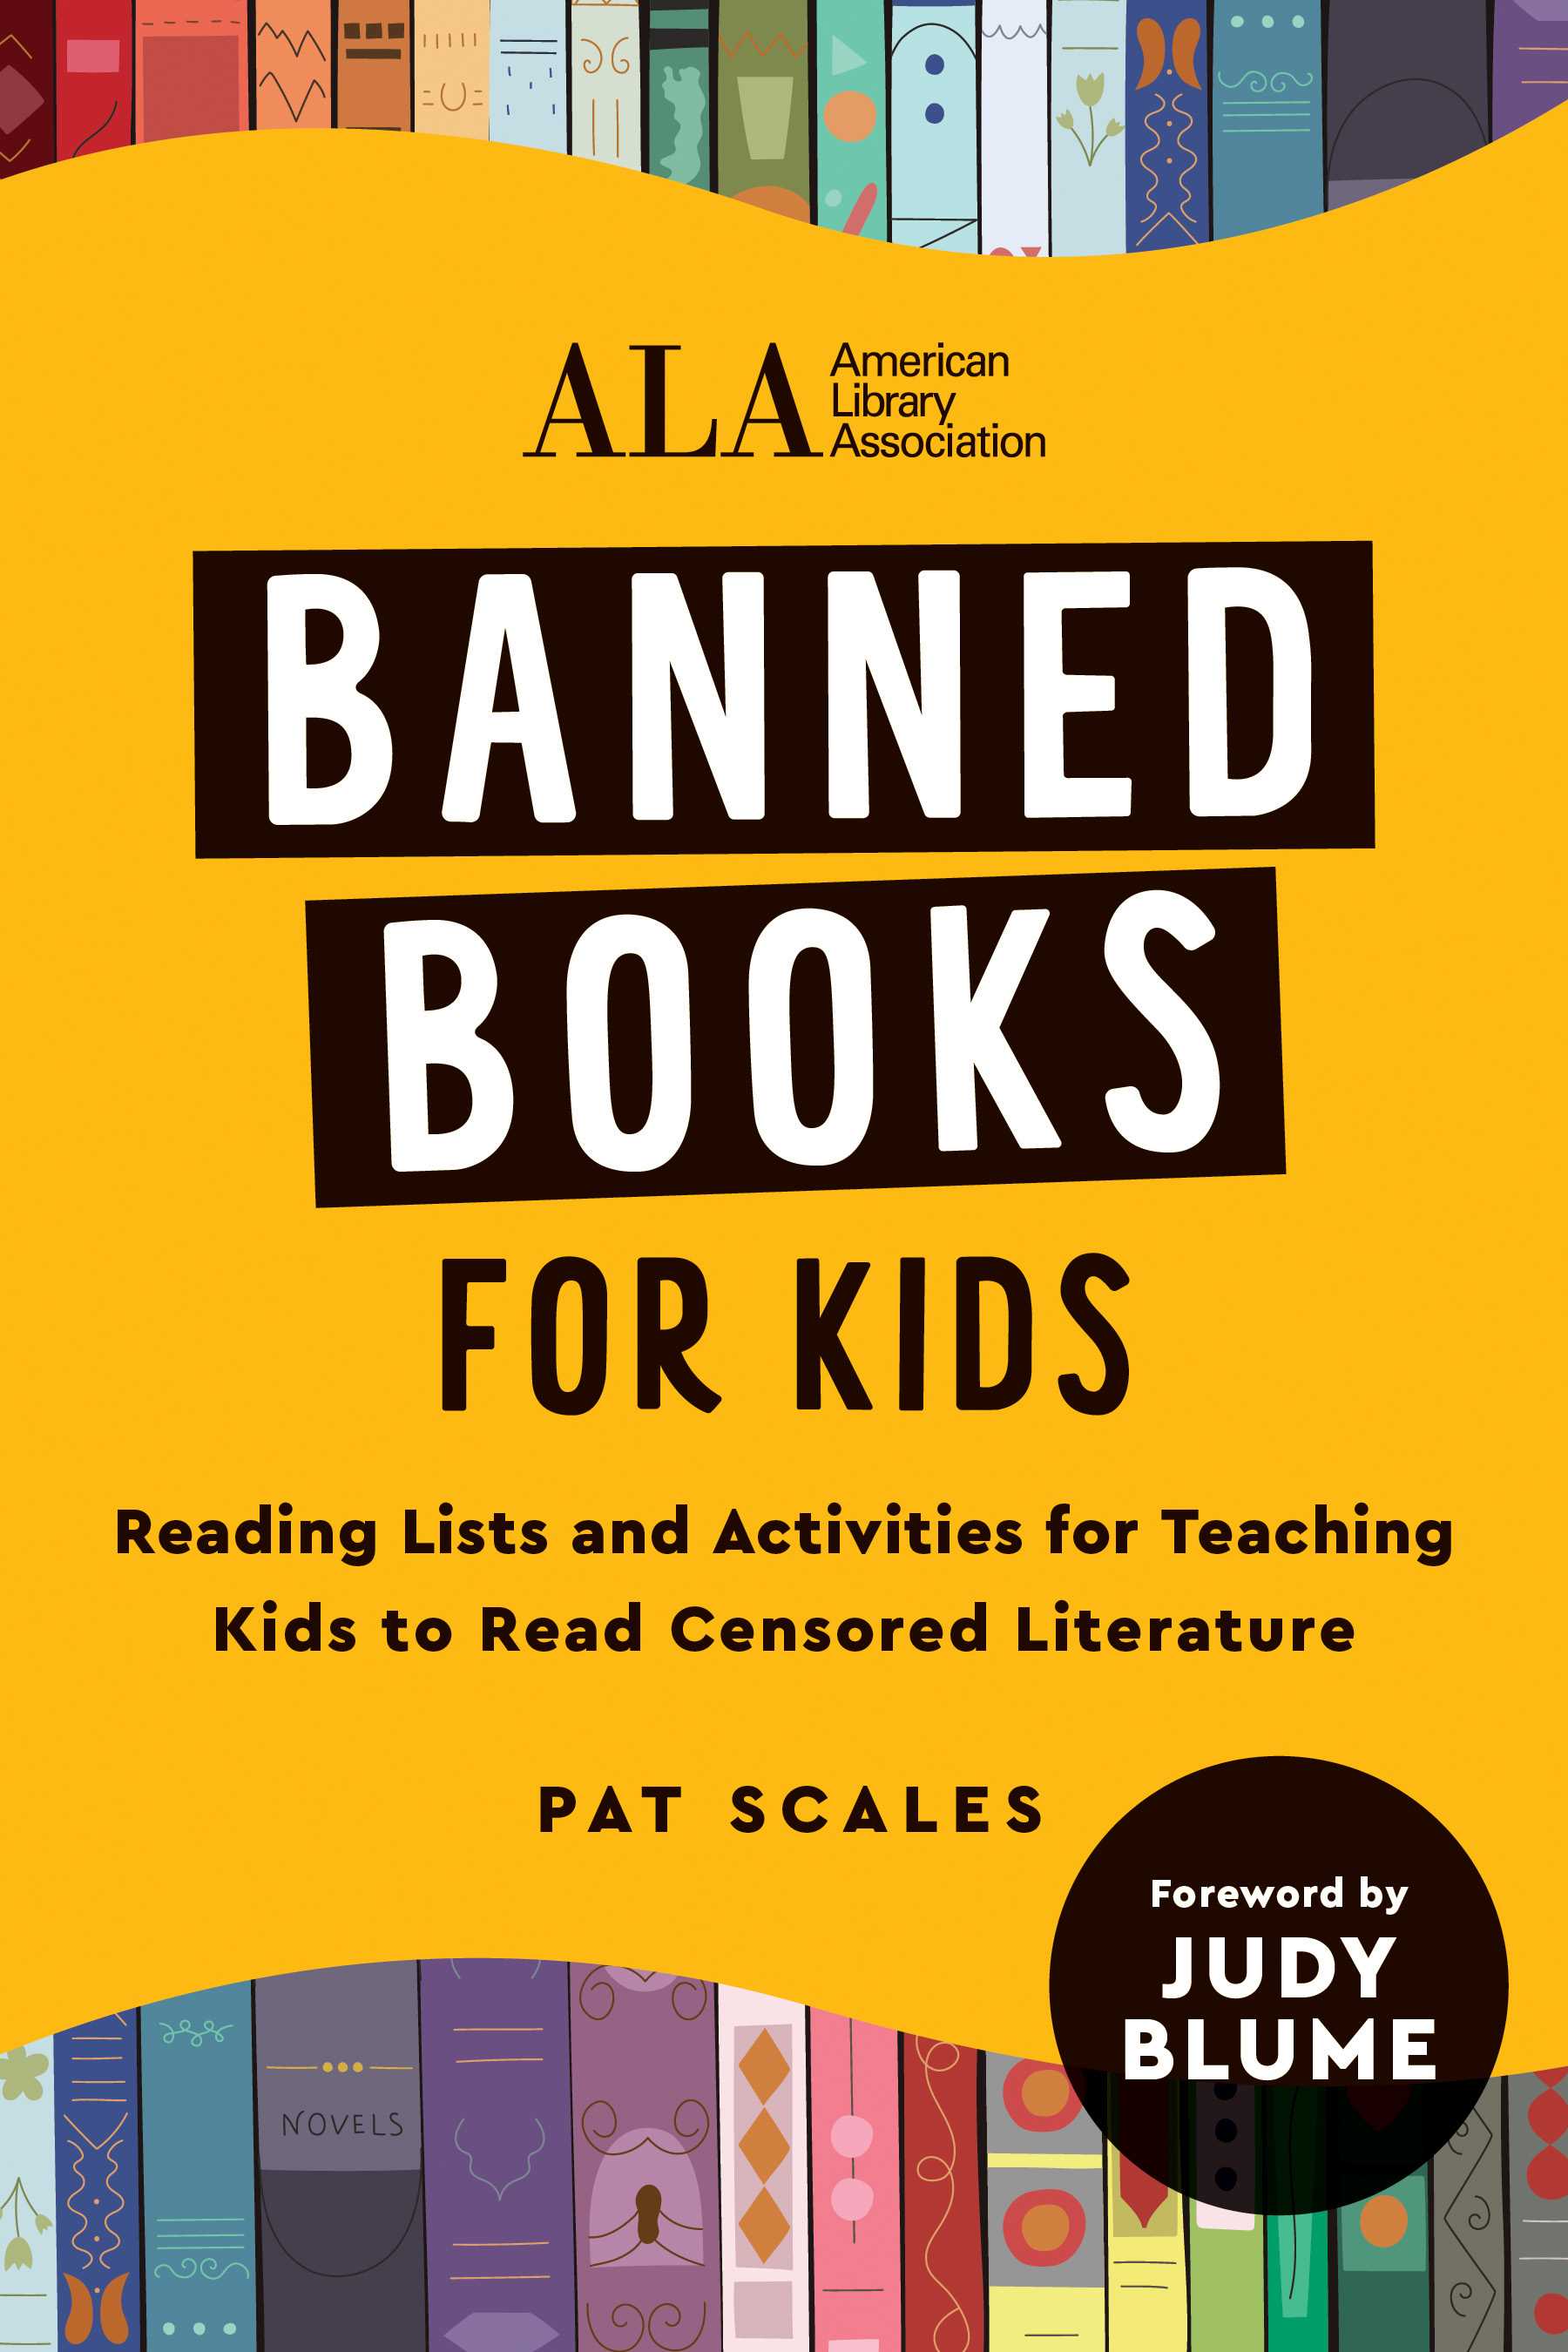 Teaching Banned Books to Kids